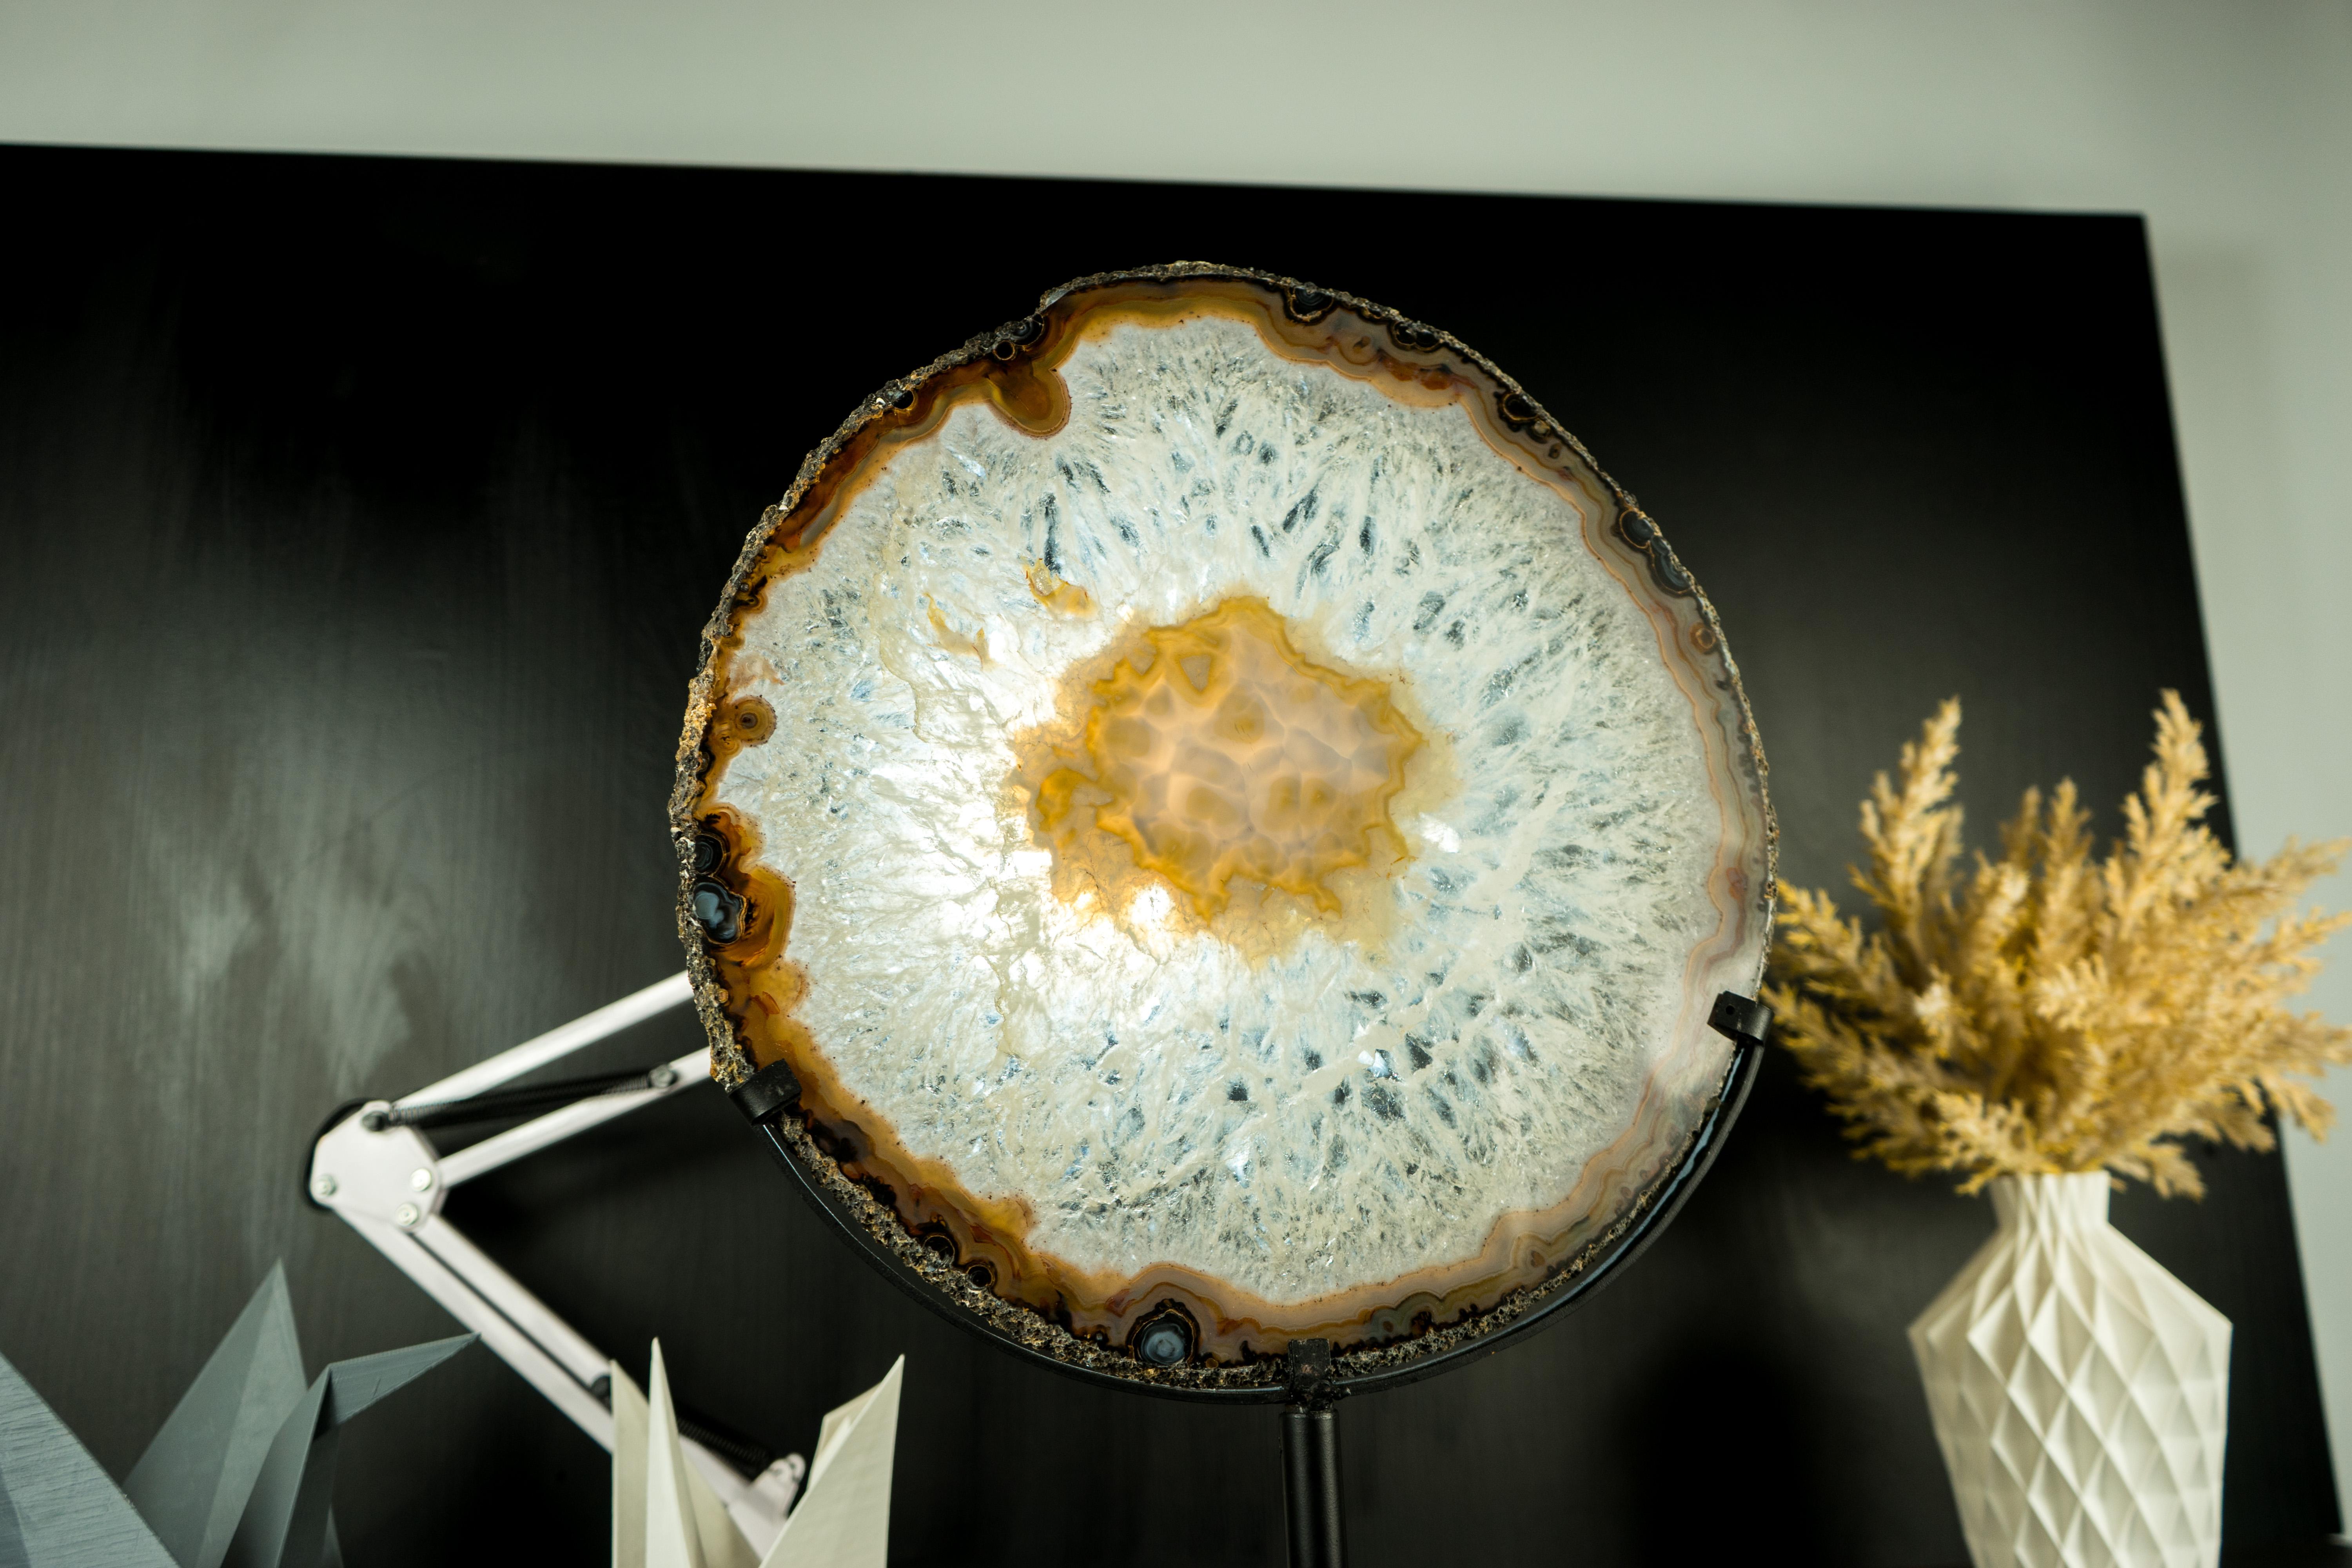 World-Class Large Lace Agate Slice, with Ice-Like Crystal and Colorful Agate For Sale 9